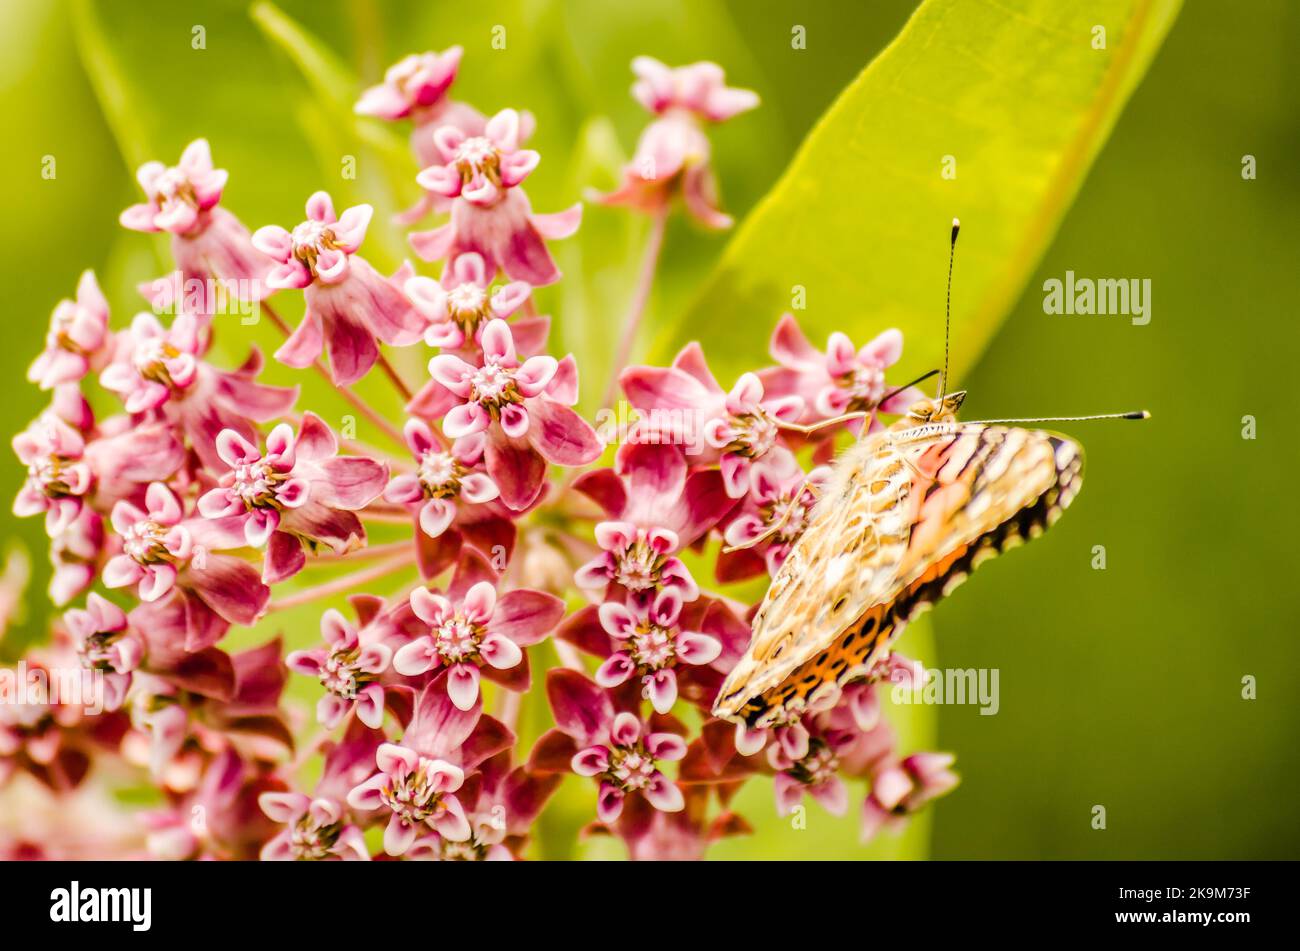 A nice butterfly (Vanessa cardui) on white flowers and green background. Stock Photo